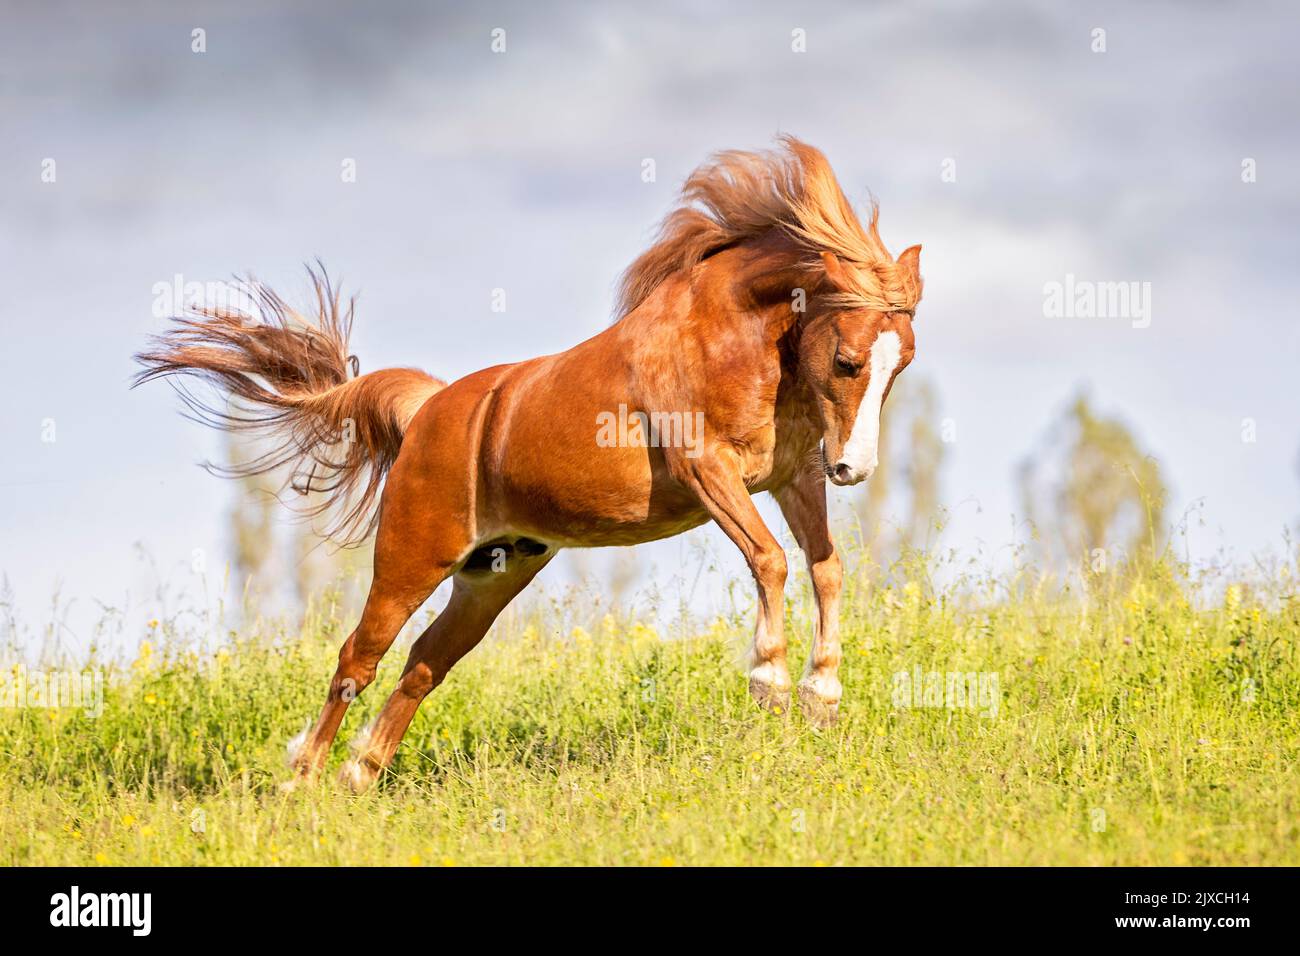 Welsh Pony (Section C). Chestnut gelding bucking on a meadow. Germany. Stock Photo